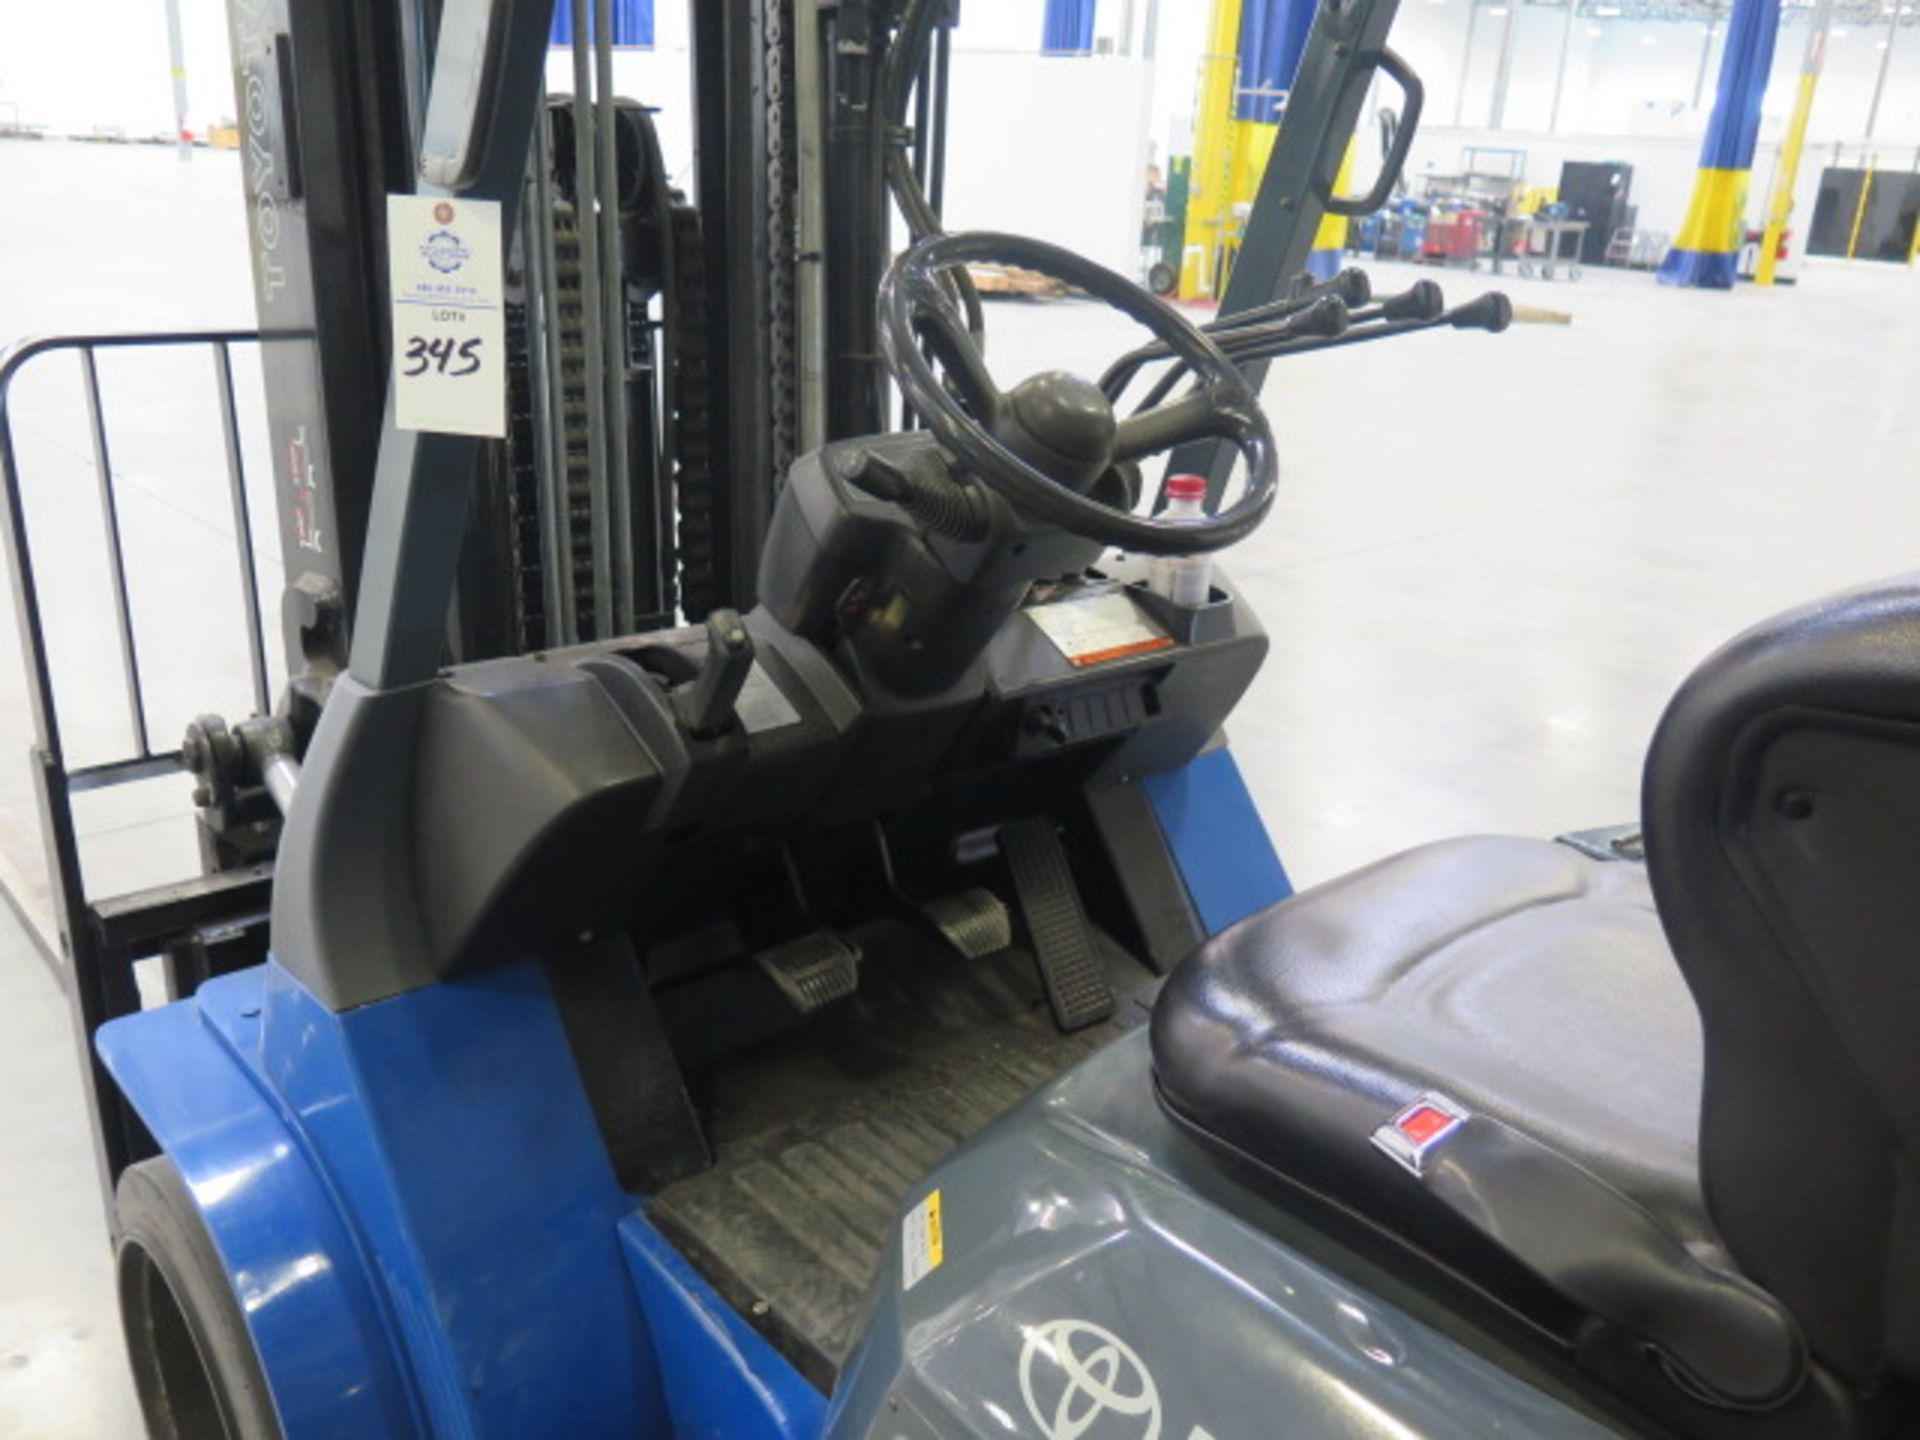 Toyota 7FGCU45 10,000 Lb Cap LPG Forklift s/n 70247 w/ 3-Stage Mast, 187” Lift height, Side Shift, - Image 4 of 13